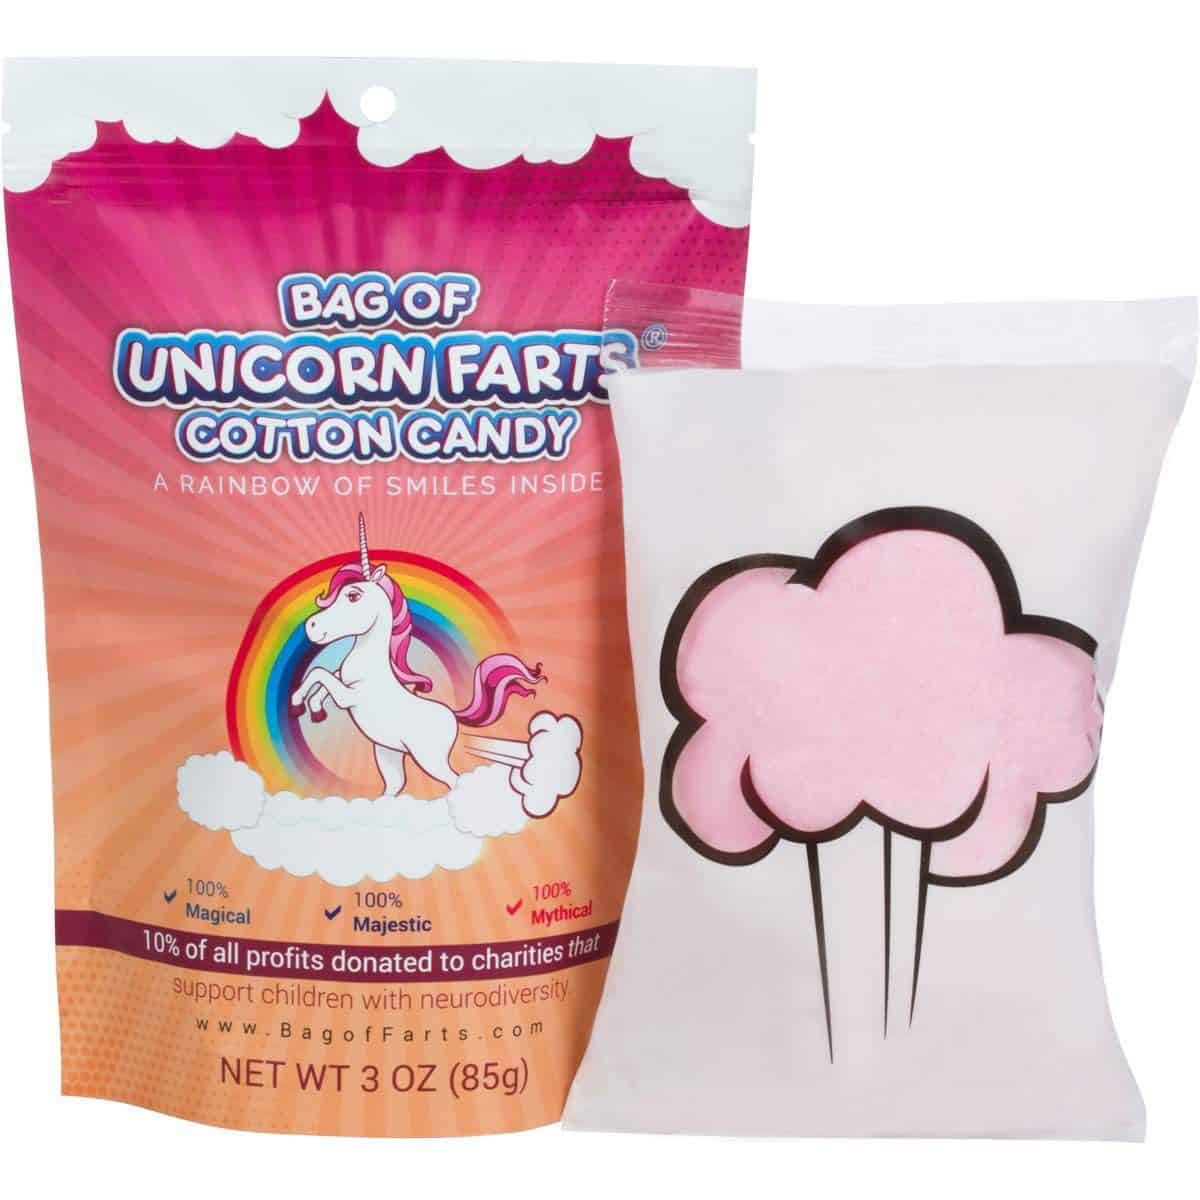 Dailymom Parent Portal White Elephant Gifts Unicorn Fart Candy